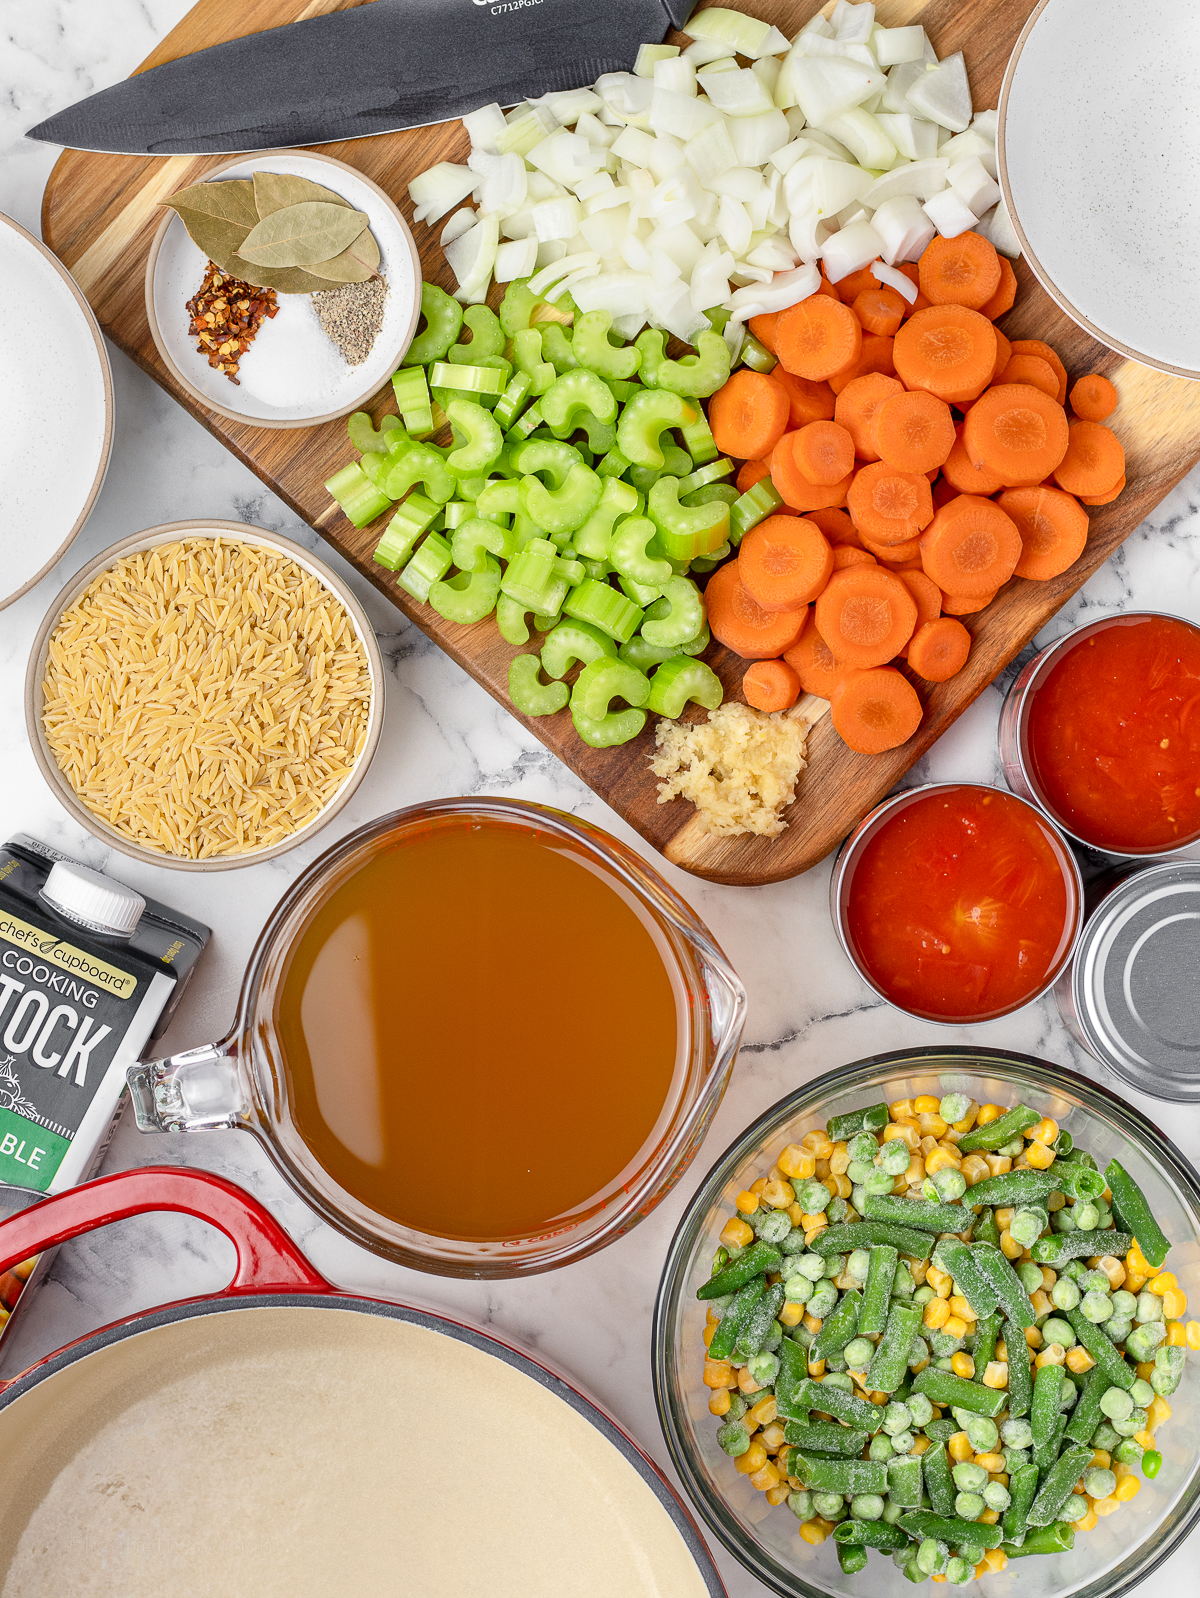 Ingredients. Yellow onion, carrots, celery, garlic, canned diced tomatoes, vegetable stock, bay leaves, salt, black pepper, red pepper flakes, frozen green beans, frozen sweet corn, frozen peas, uncooked orzo pasta.